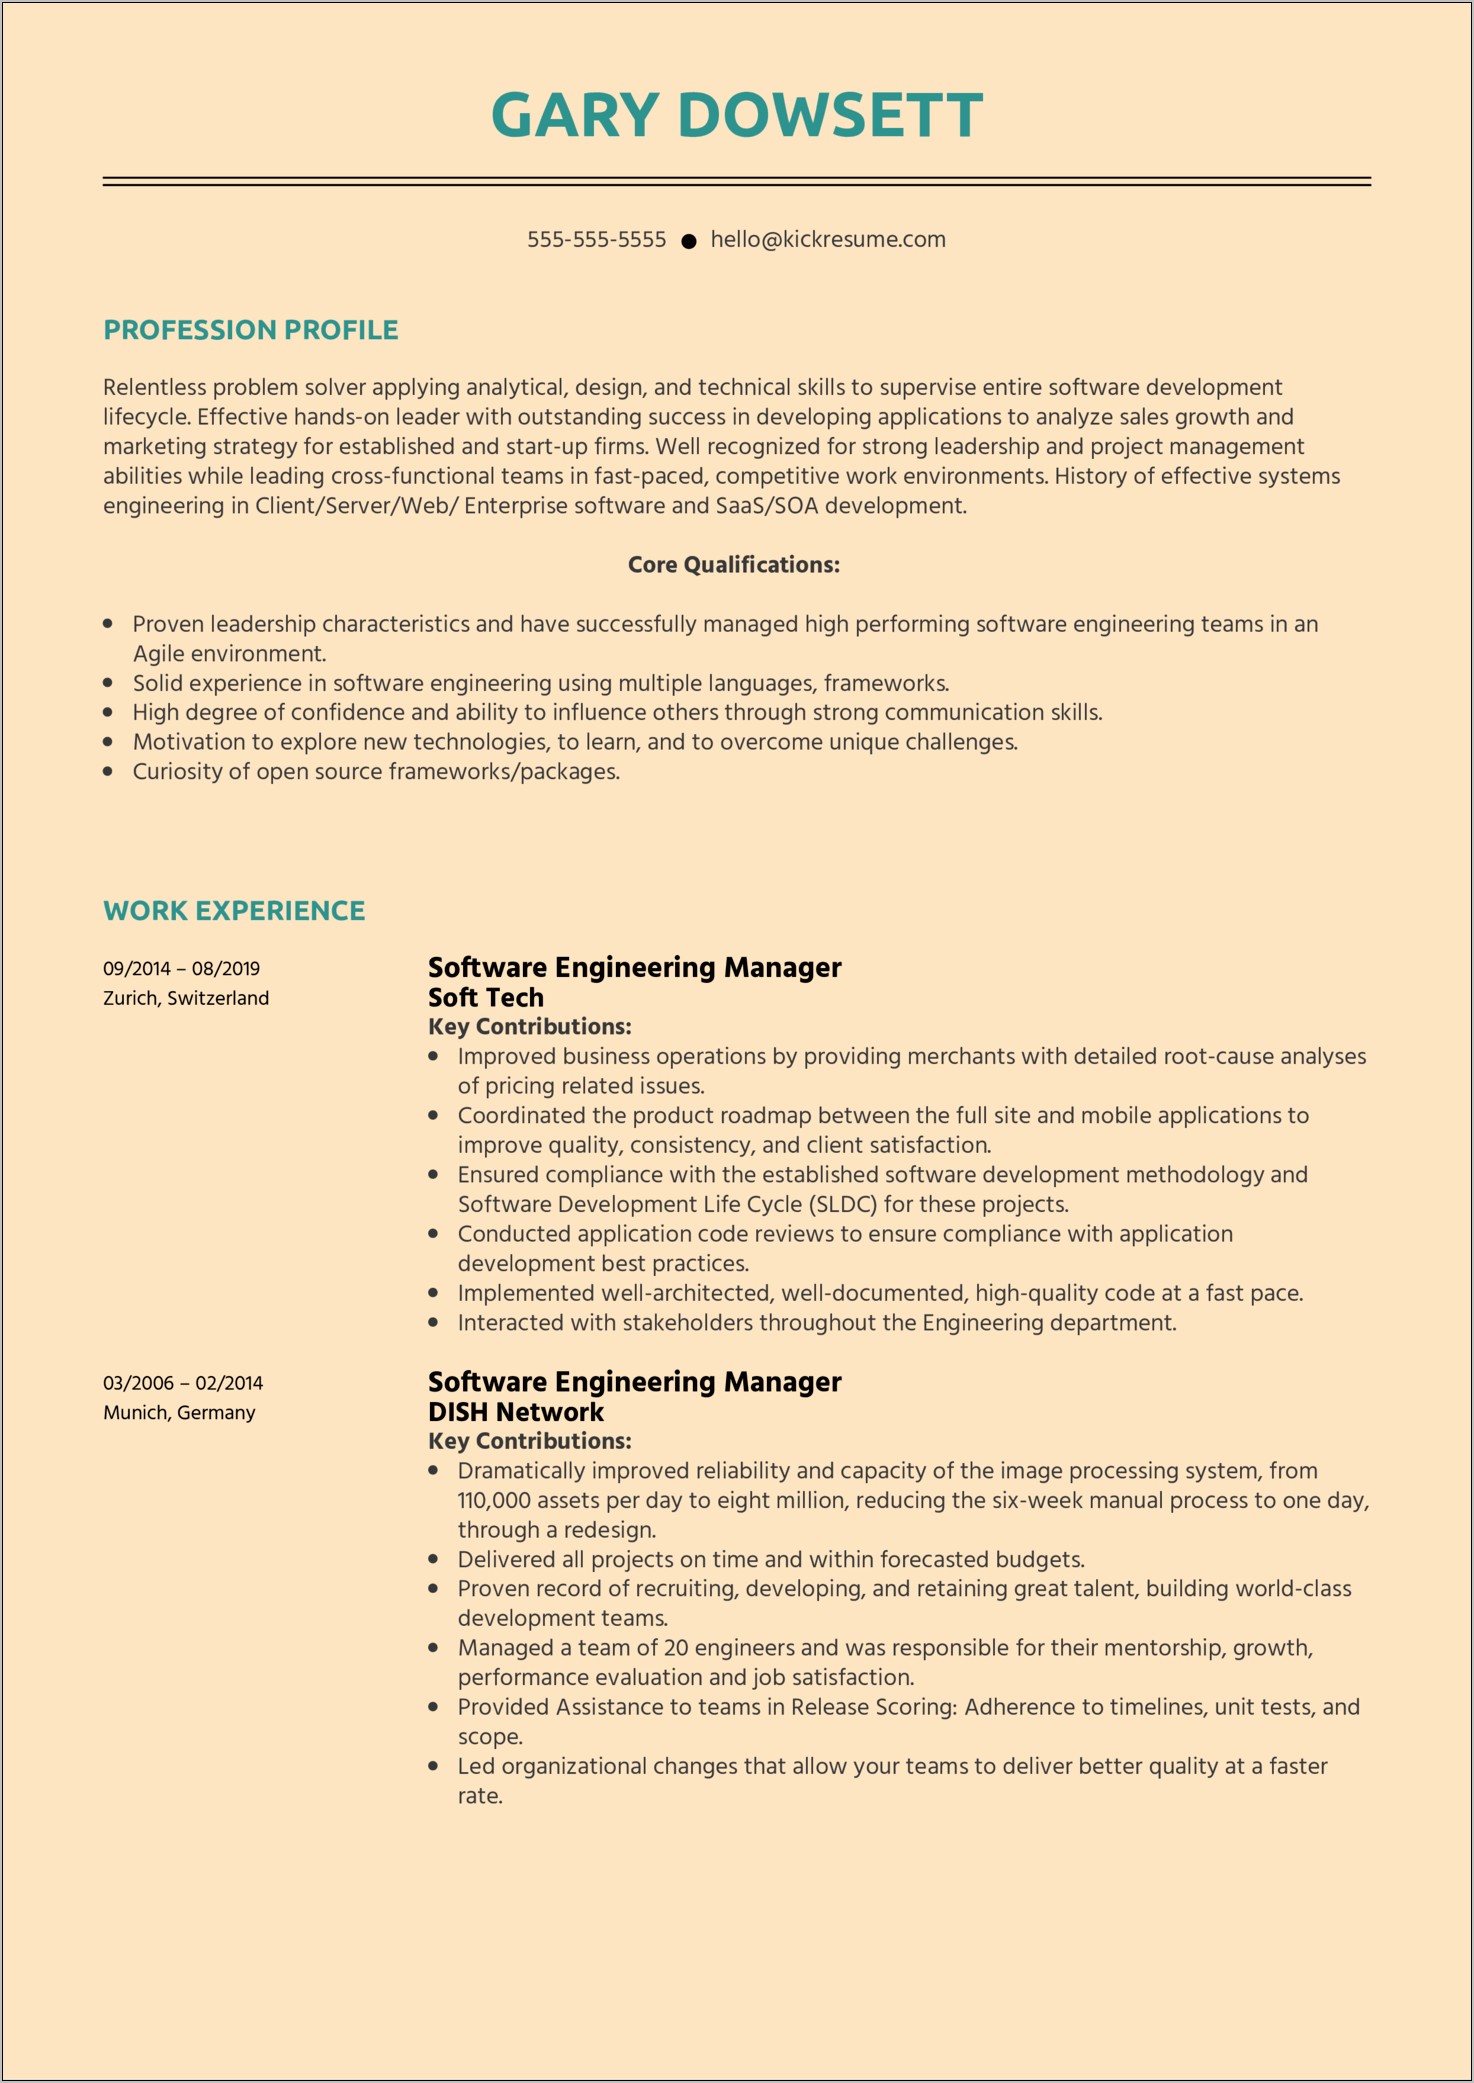 Software Engineer Resume Without Related Work Experience Examples